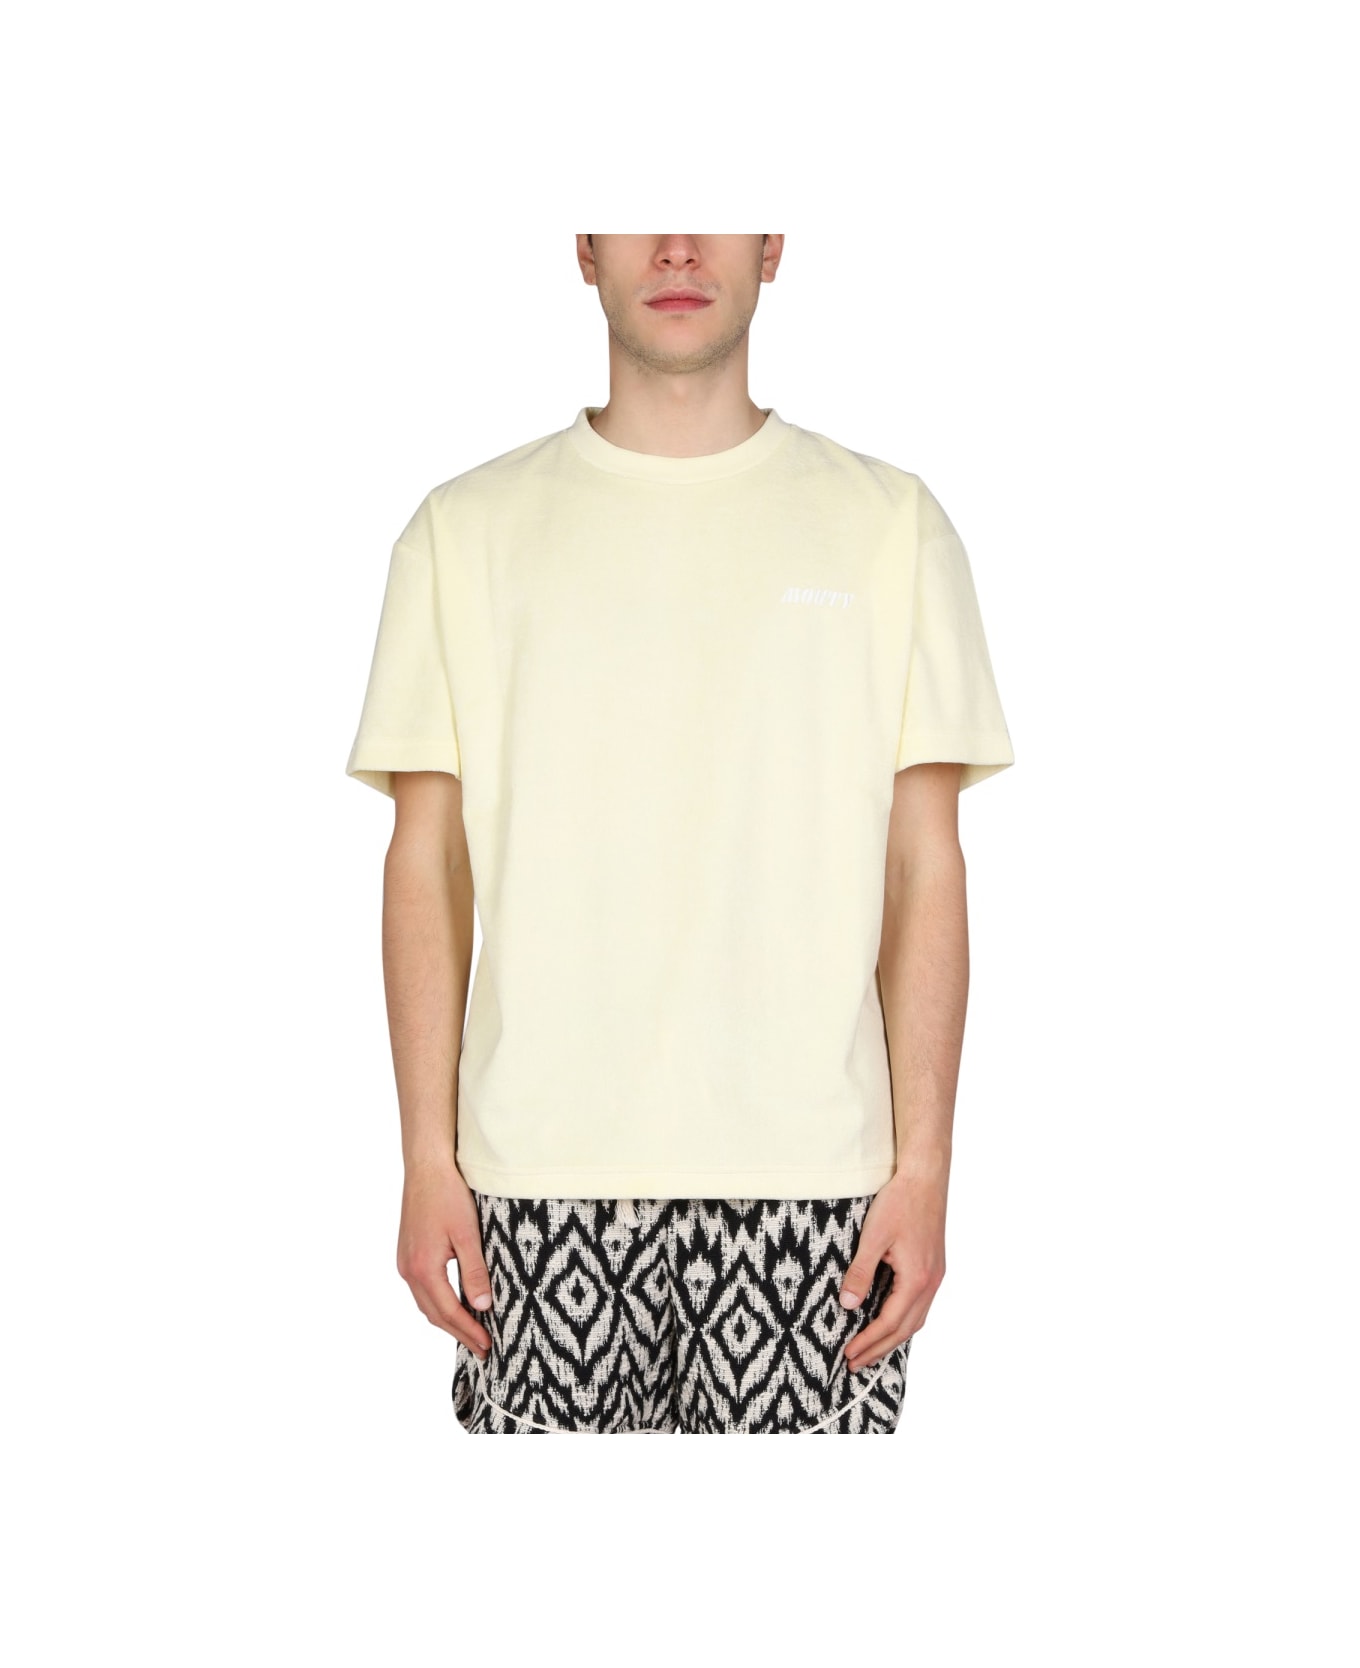 Mouty "terry" T-shirt - YELLOW